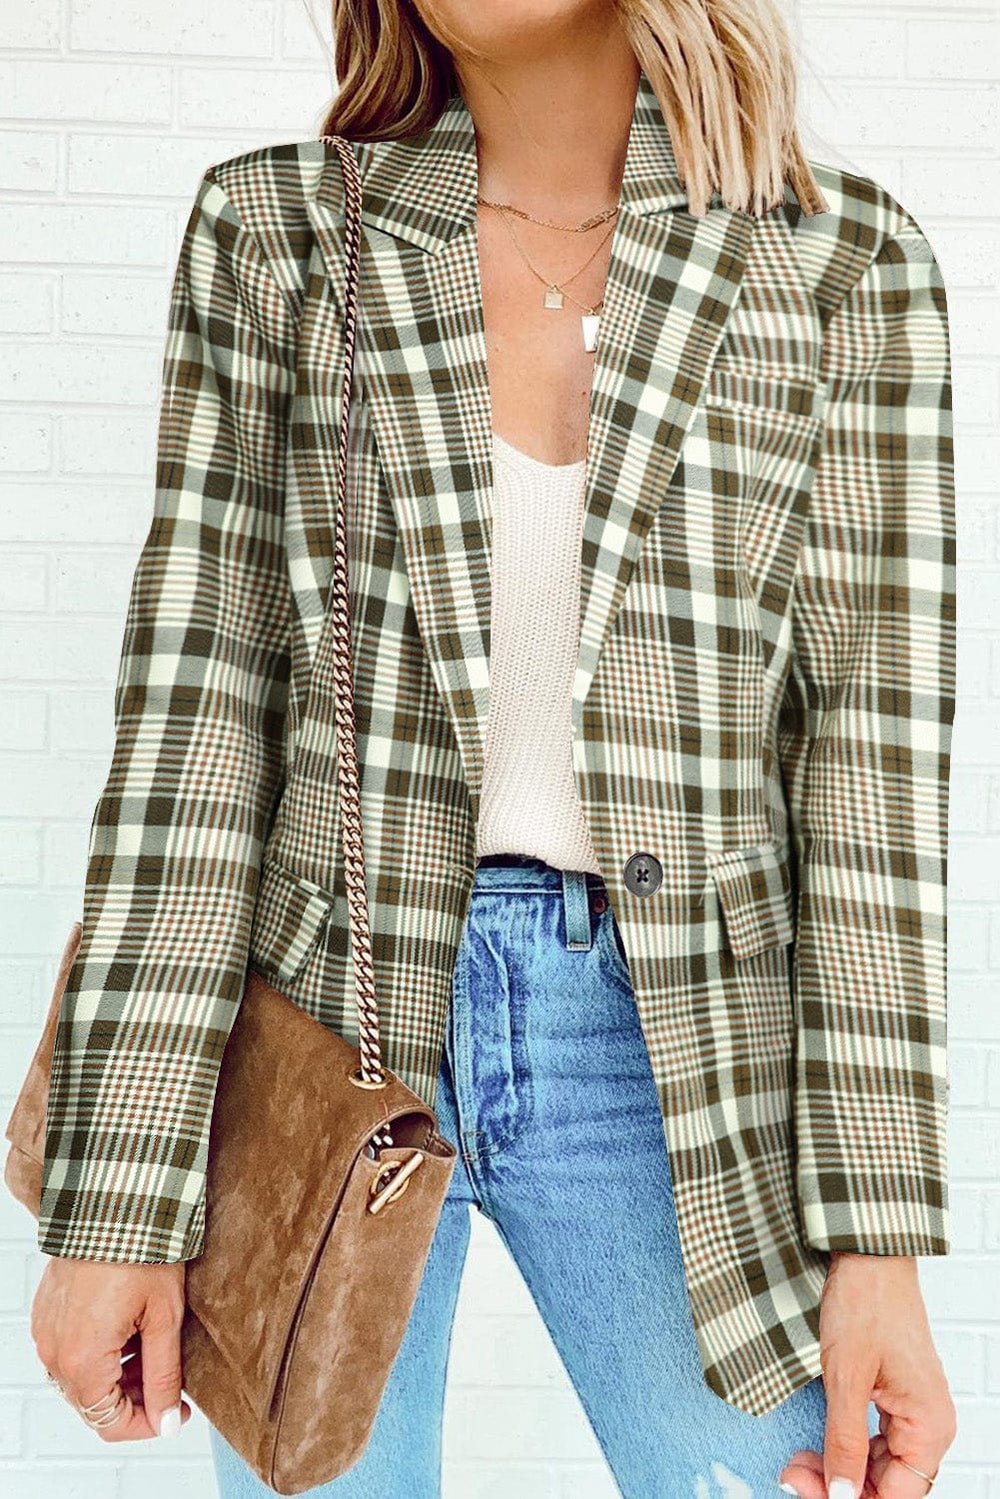 The802Gypsy  coats and jackets Khaki-2 / S / 100%polyester TRAVELING GYPSY-Plaid Print Lapel Collar Buttoned Blazer